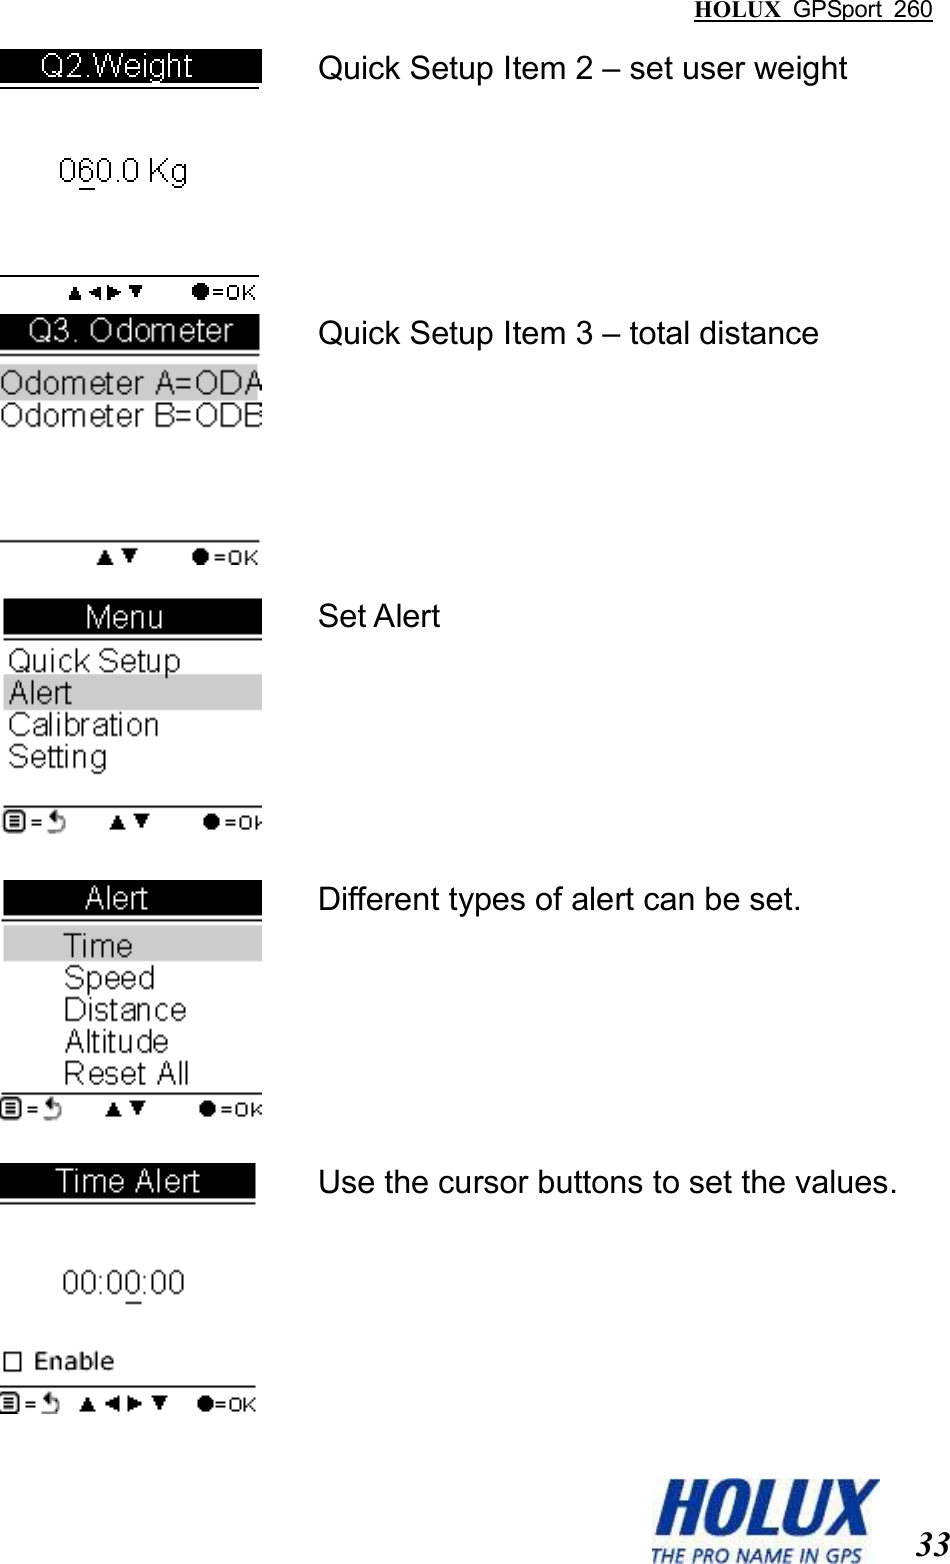 HOLUX  GPSport  260  33  Quick Setup Item 2 – set user weight  Quick Setup Item 3 – total distance  Set Alert  Different types of alert can be set.  Use the cursor buttons to set the values. 